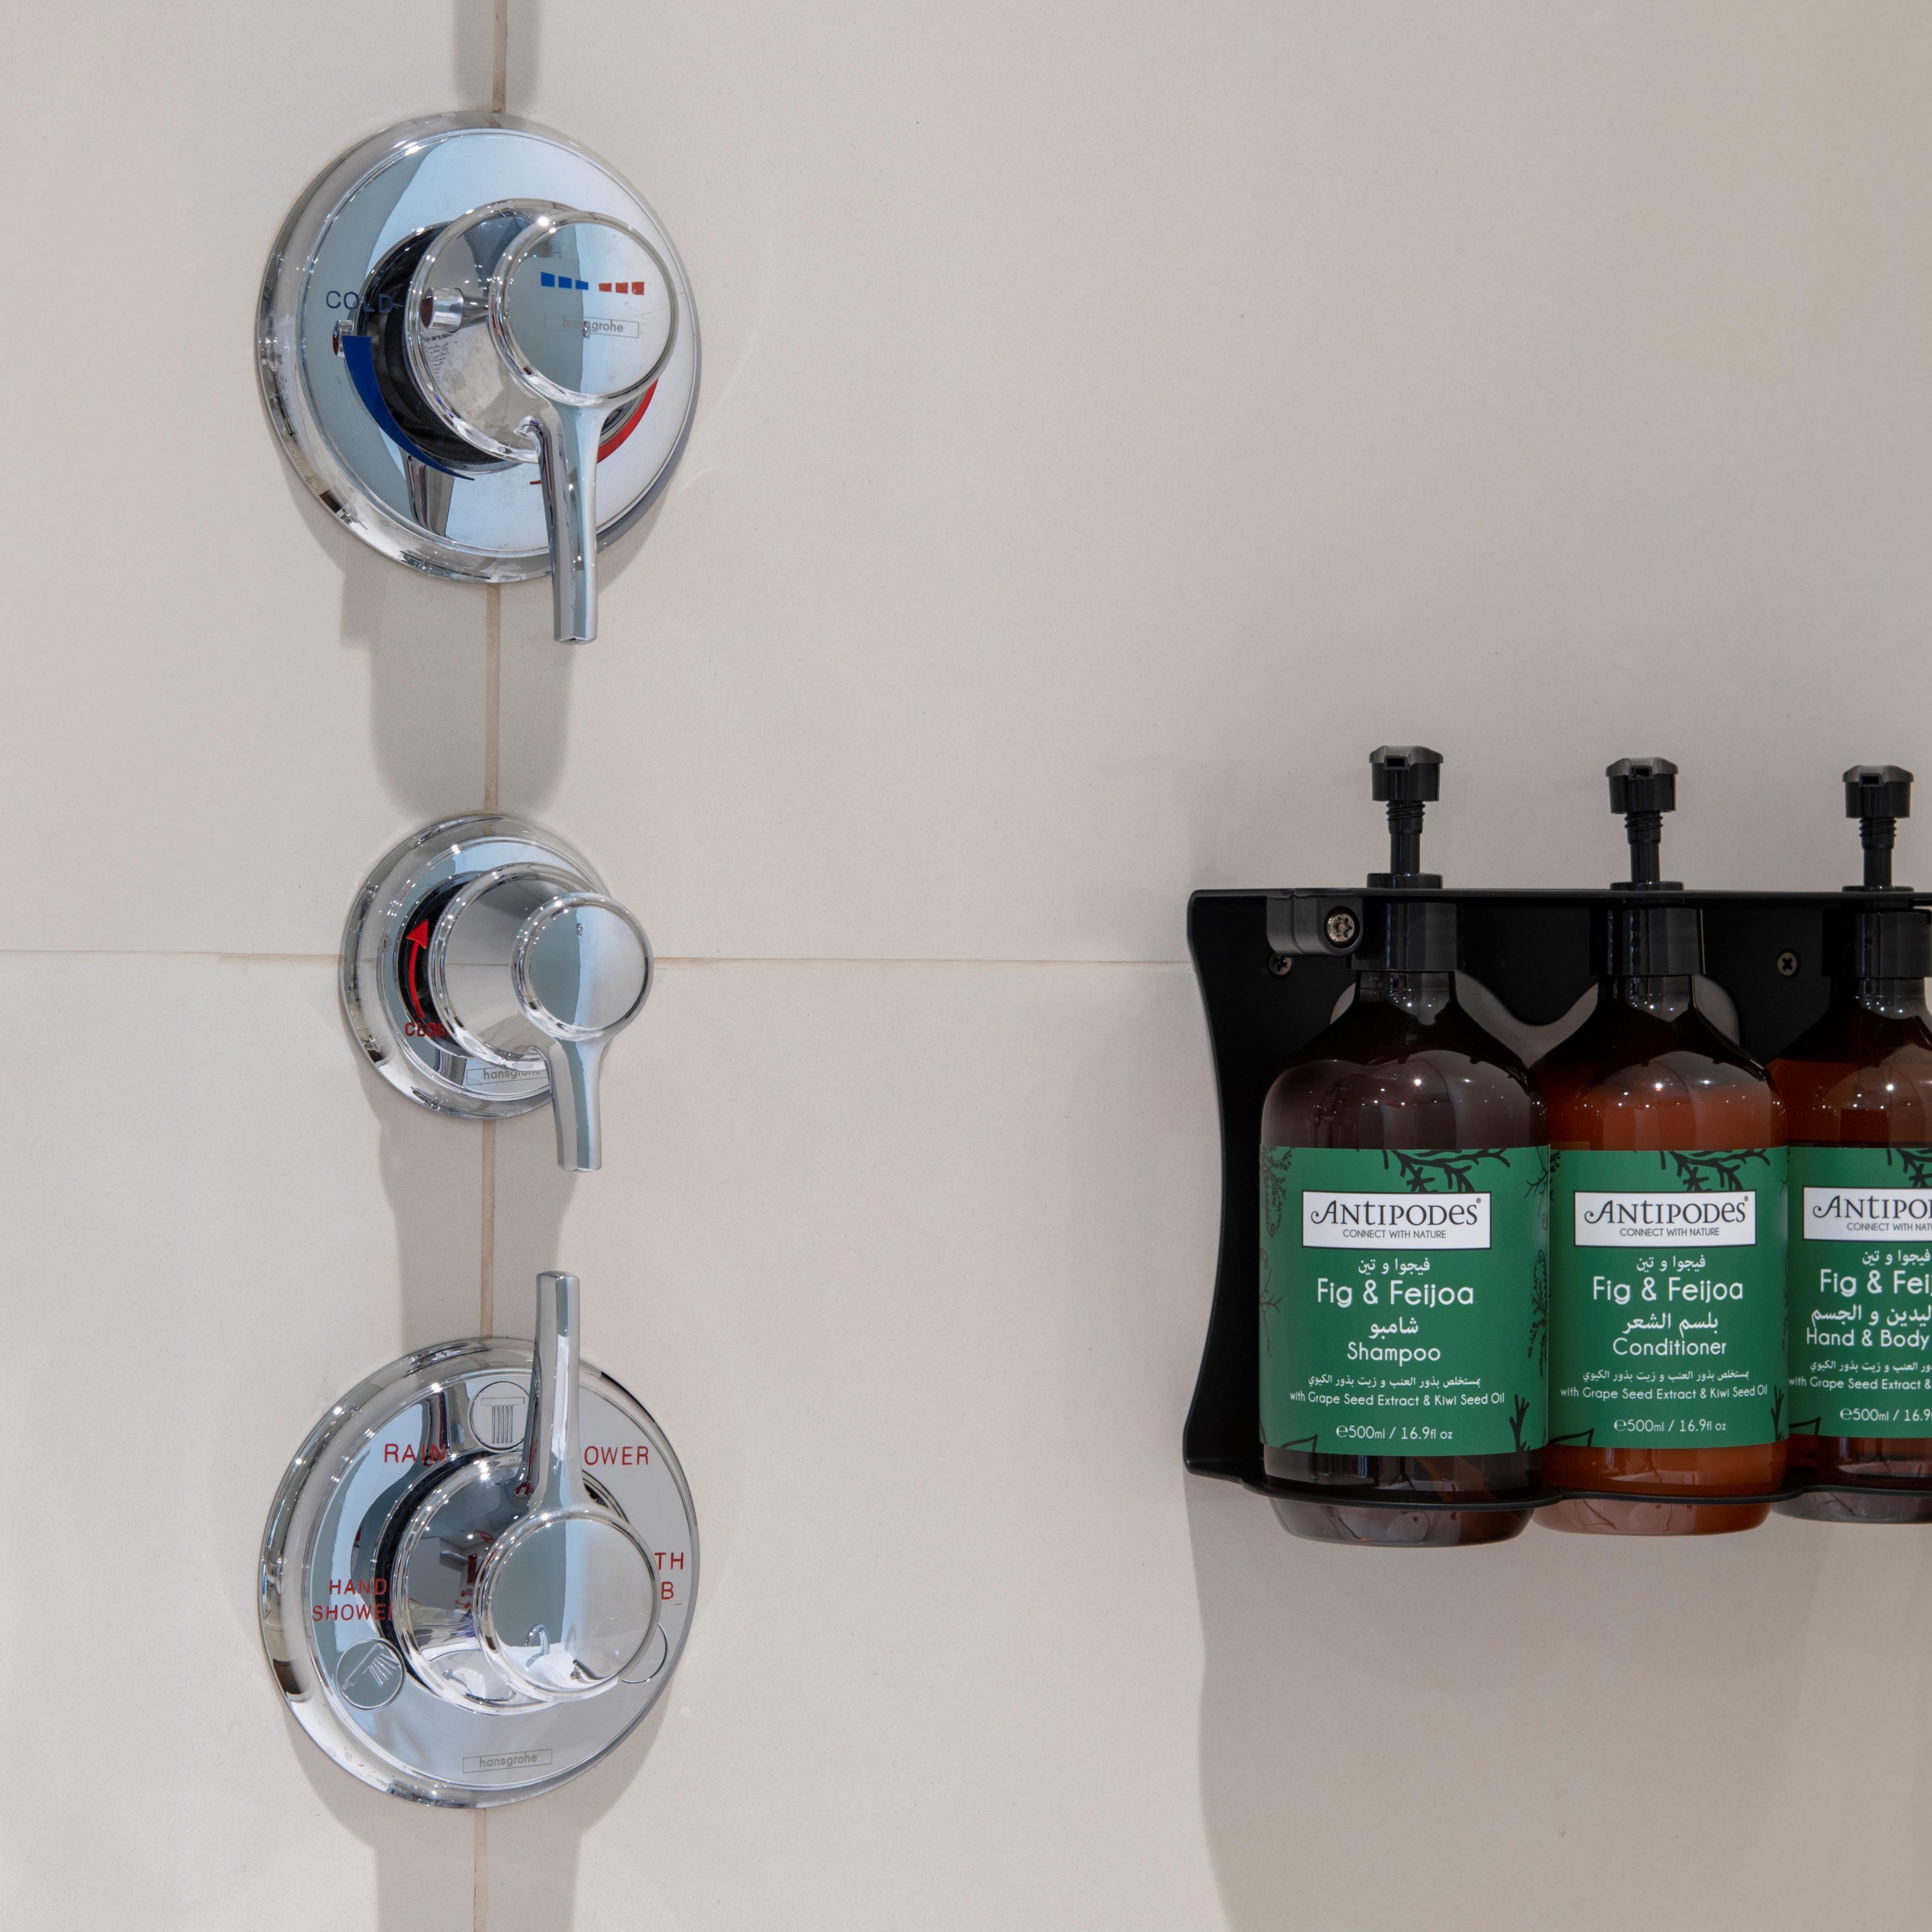 Bathroom amenities with a new wellness hotel collection-anti podes